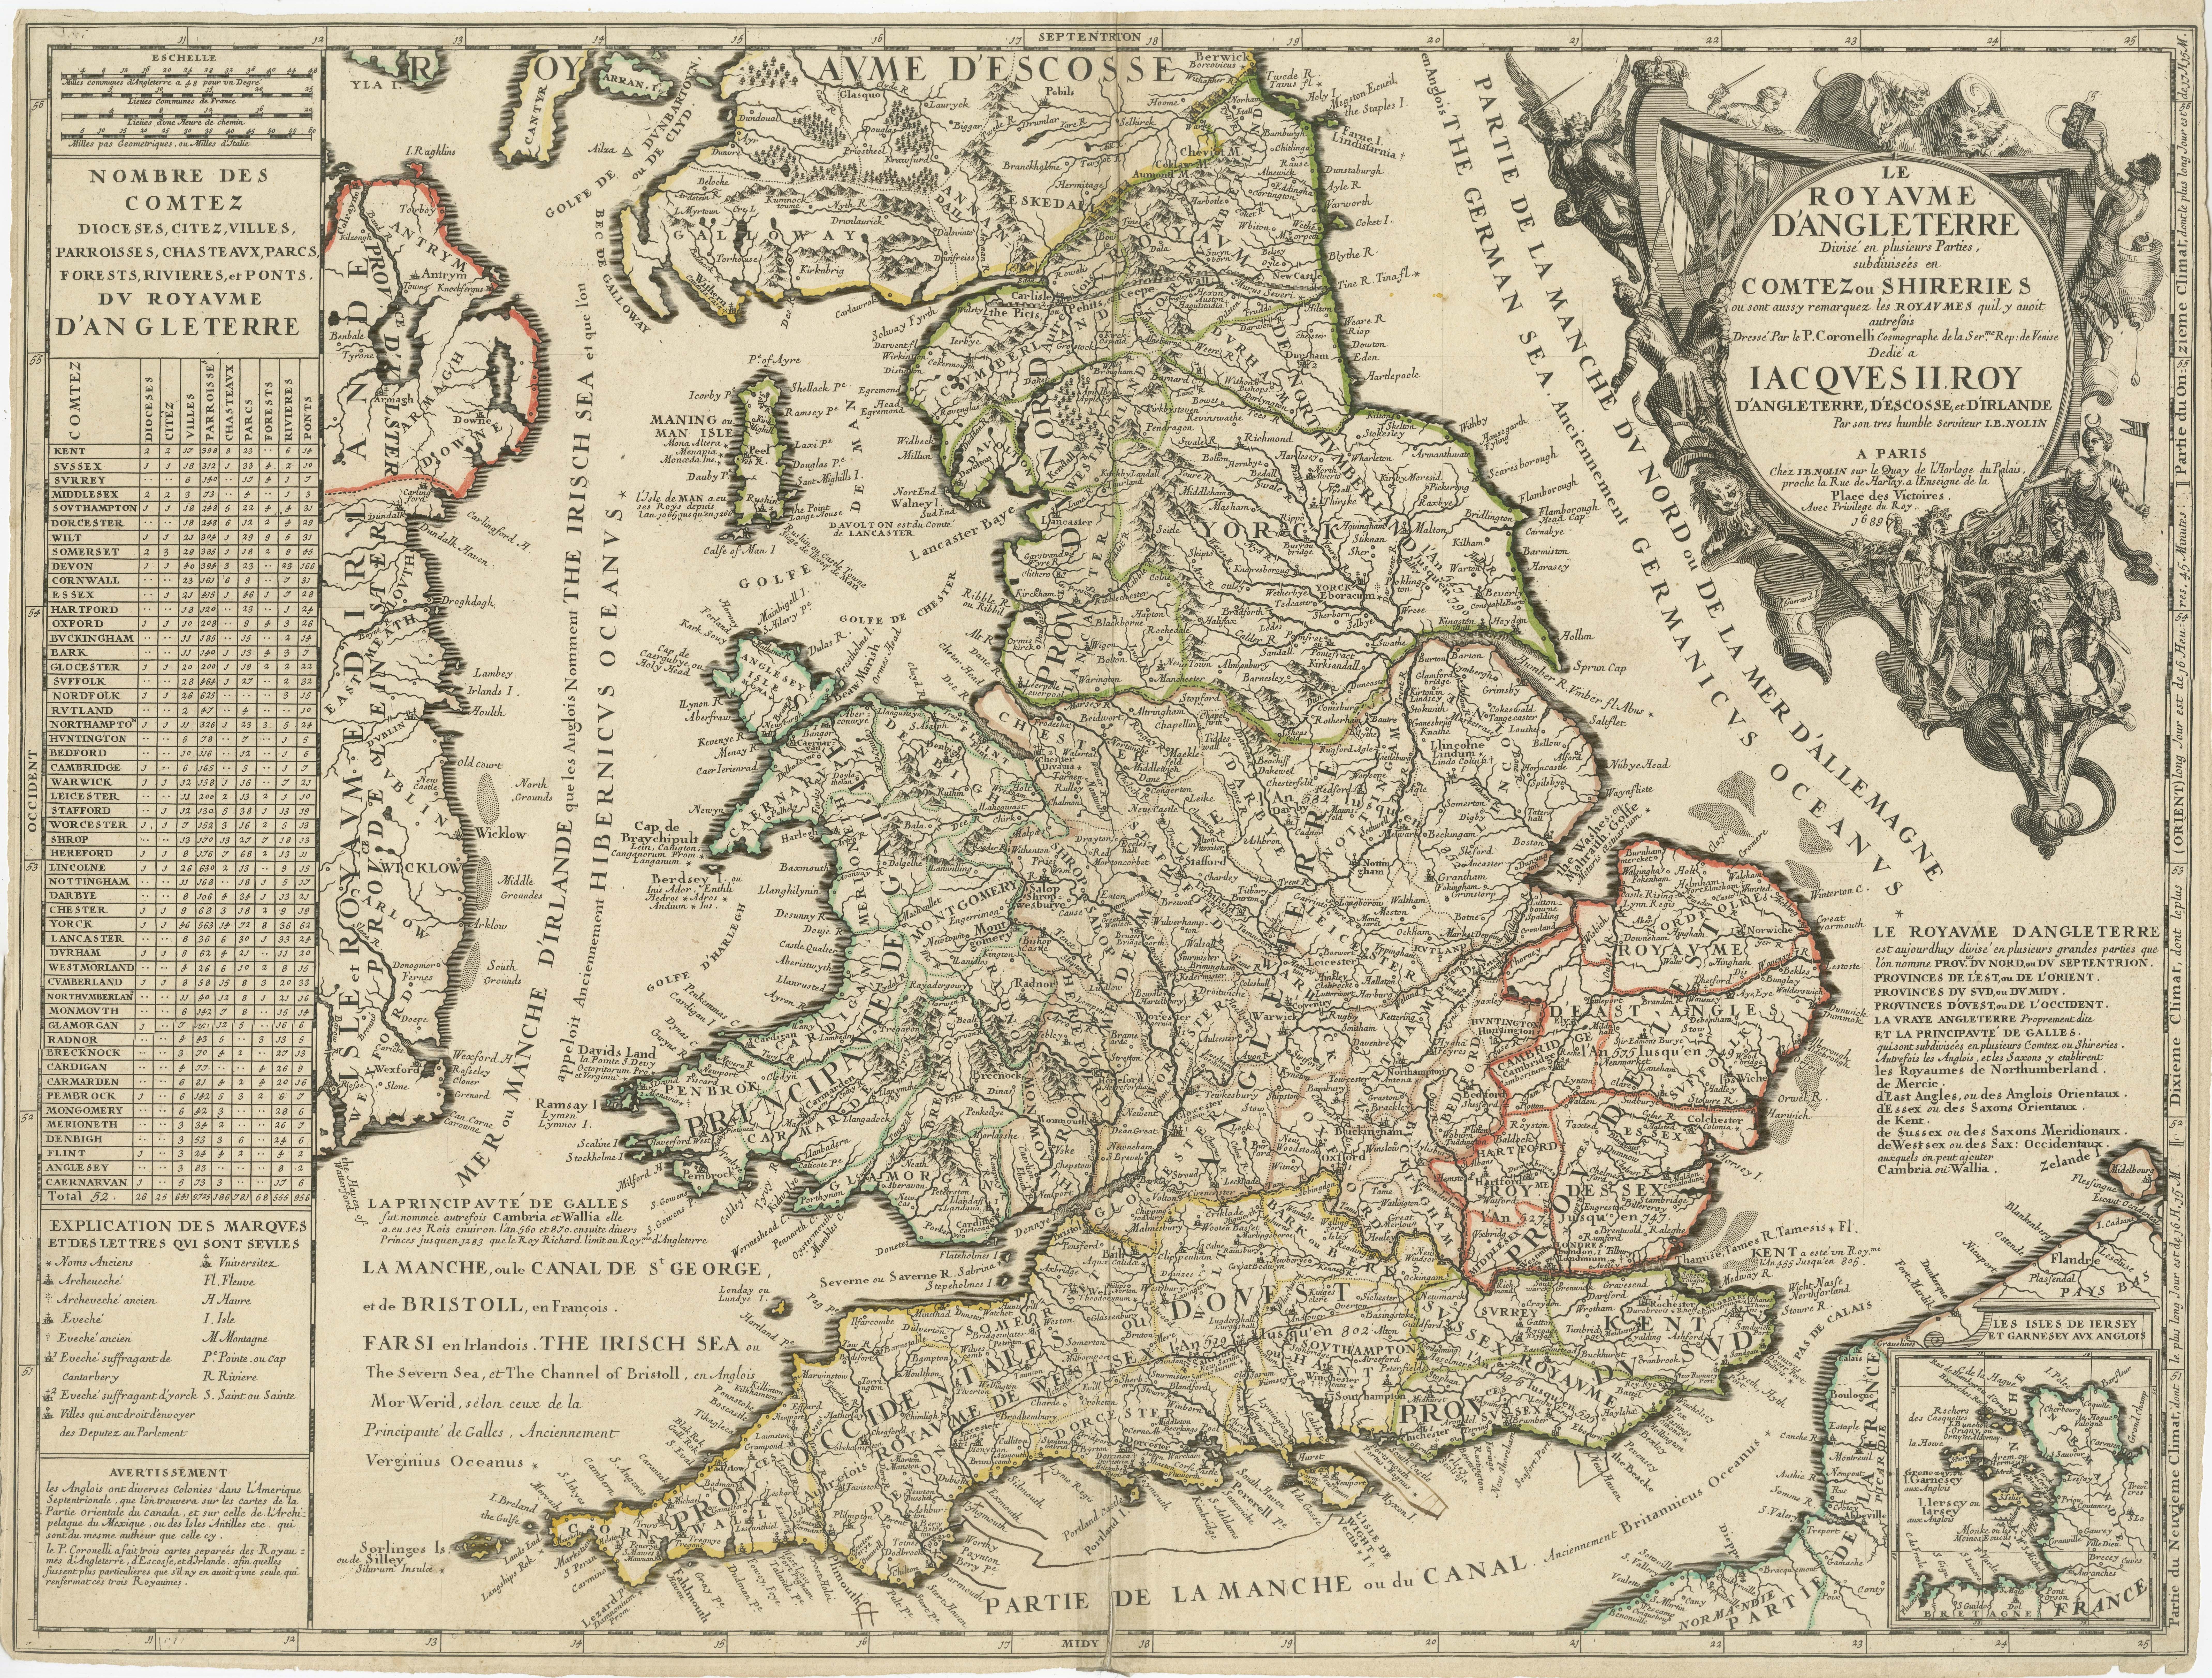 Antique map titled 'Le Royaume d'Angleterre divisé en plusieurs Parties (..)'. Large and rare map of England and Wales by J.B. Nolin after Coronelli. With decorative cartouche, table and inset map of the Jersey and Guernsey Islands. Published 1689.